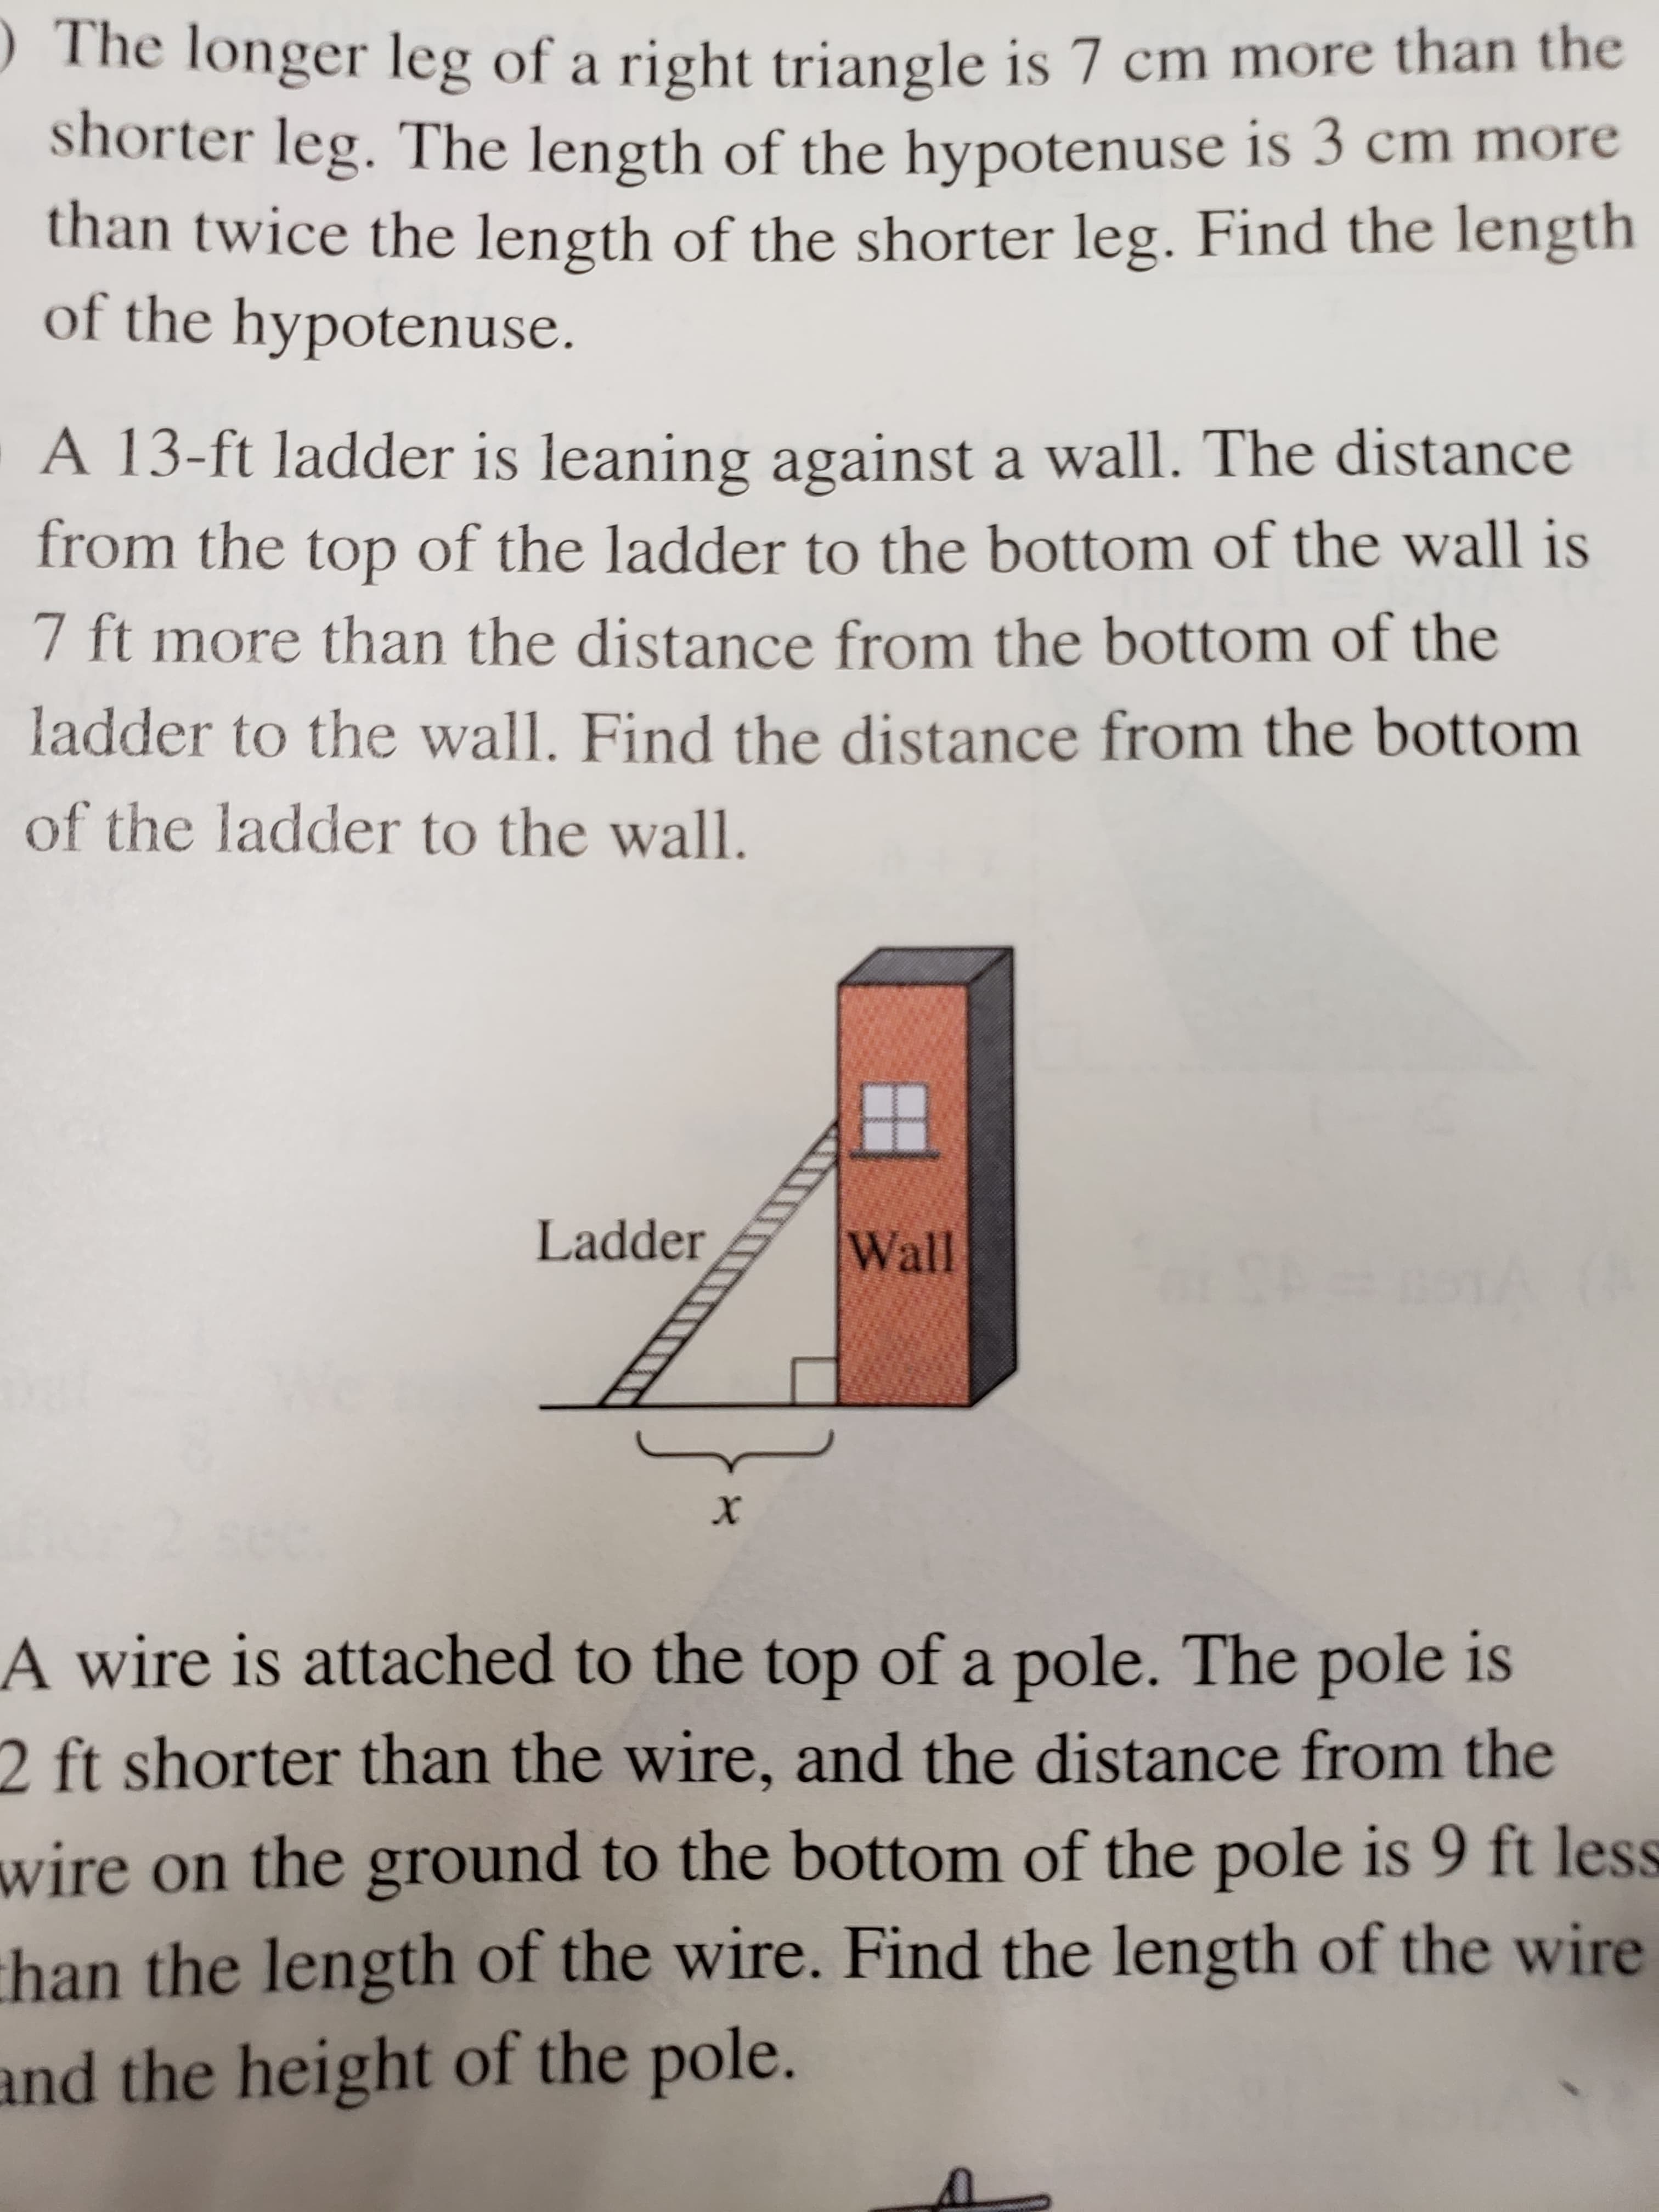 The longer leg of a right triangle is 7 cm more than the
shorter leg. The length of the hypotenuse is 3 cm more
than twice the length of the shorter leg. Find the length
of the hypotenuse.
A 13-ft ladder is leaning against a wall. The distance
from the top of the ladder to the bottom of the wall is
7 ft more than the distance from the bottom of the
ladder to the wall. Find the distance from the bottom
of the ladder to the wall.
Ladder
Wall
#o1A
A wire is attached to the top of a pole. The pole is
2 ft shorter than the wire, and the distance from the
wire on the ground to the bottom of the pole is 9 ft less
han the length of the wire. Find the length of the wire
and the height of the pole.
